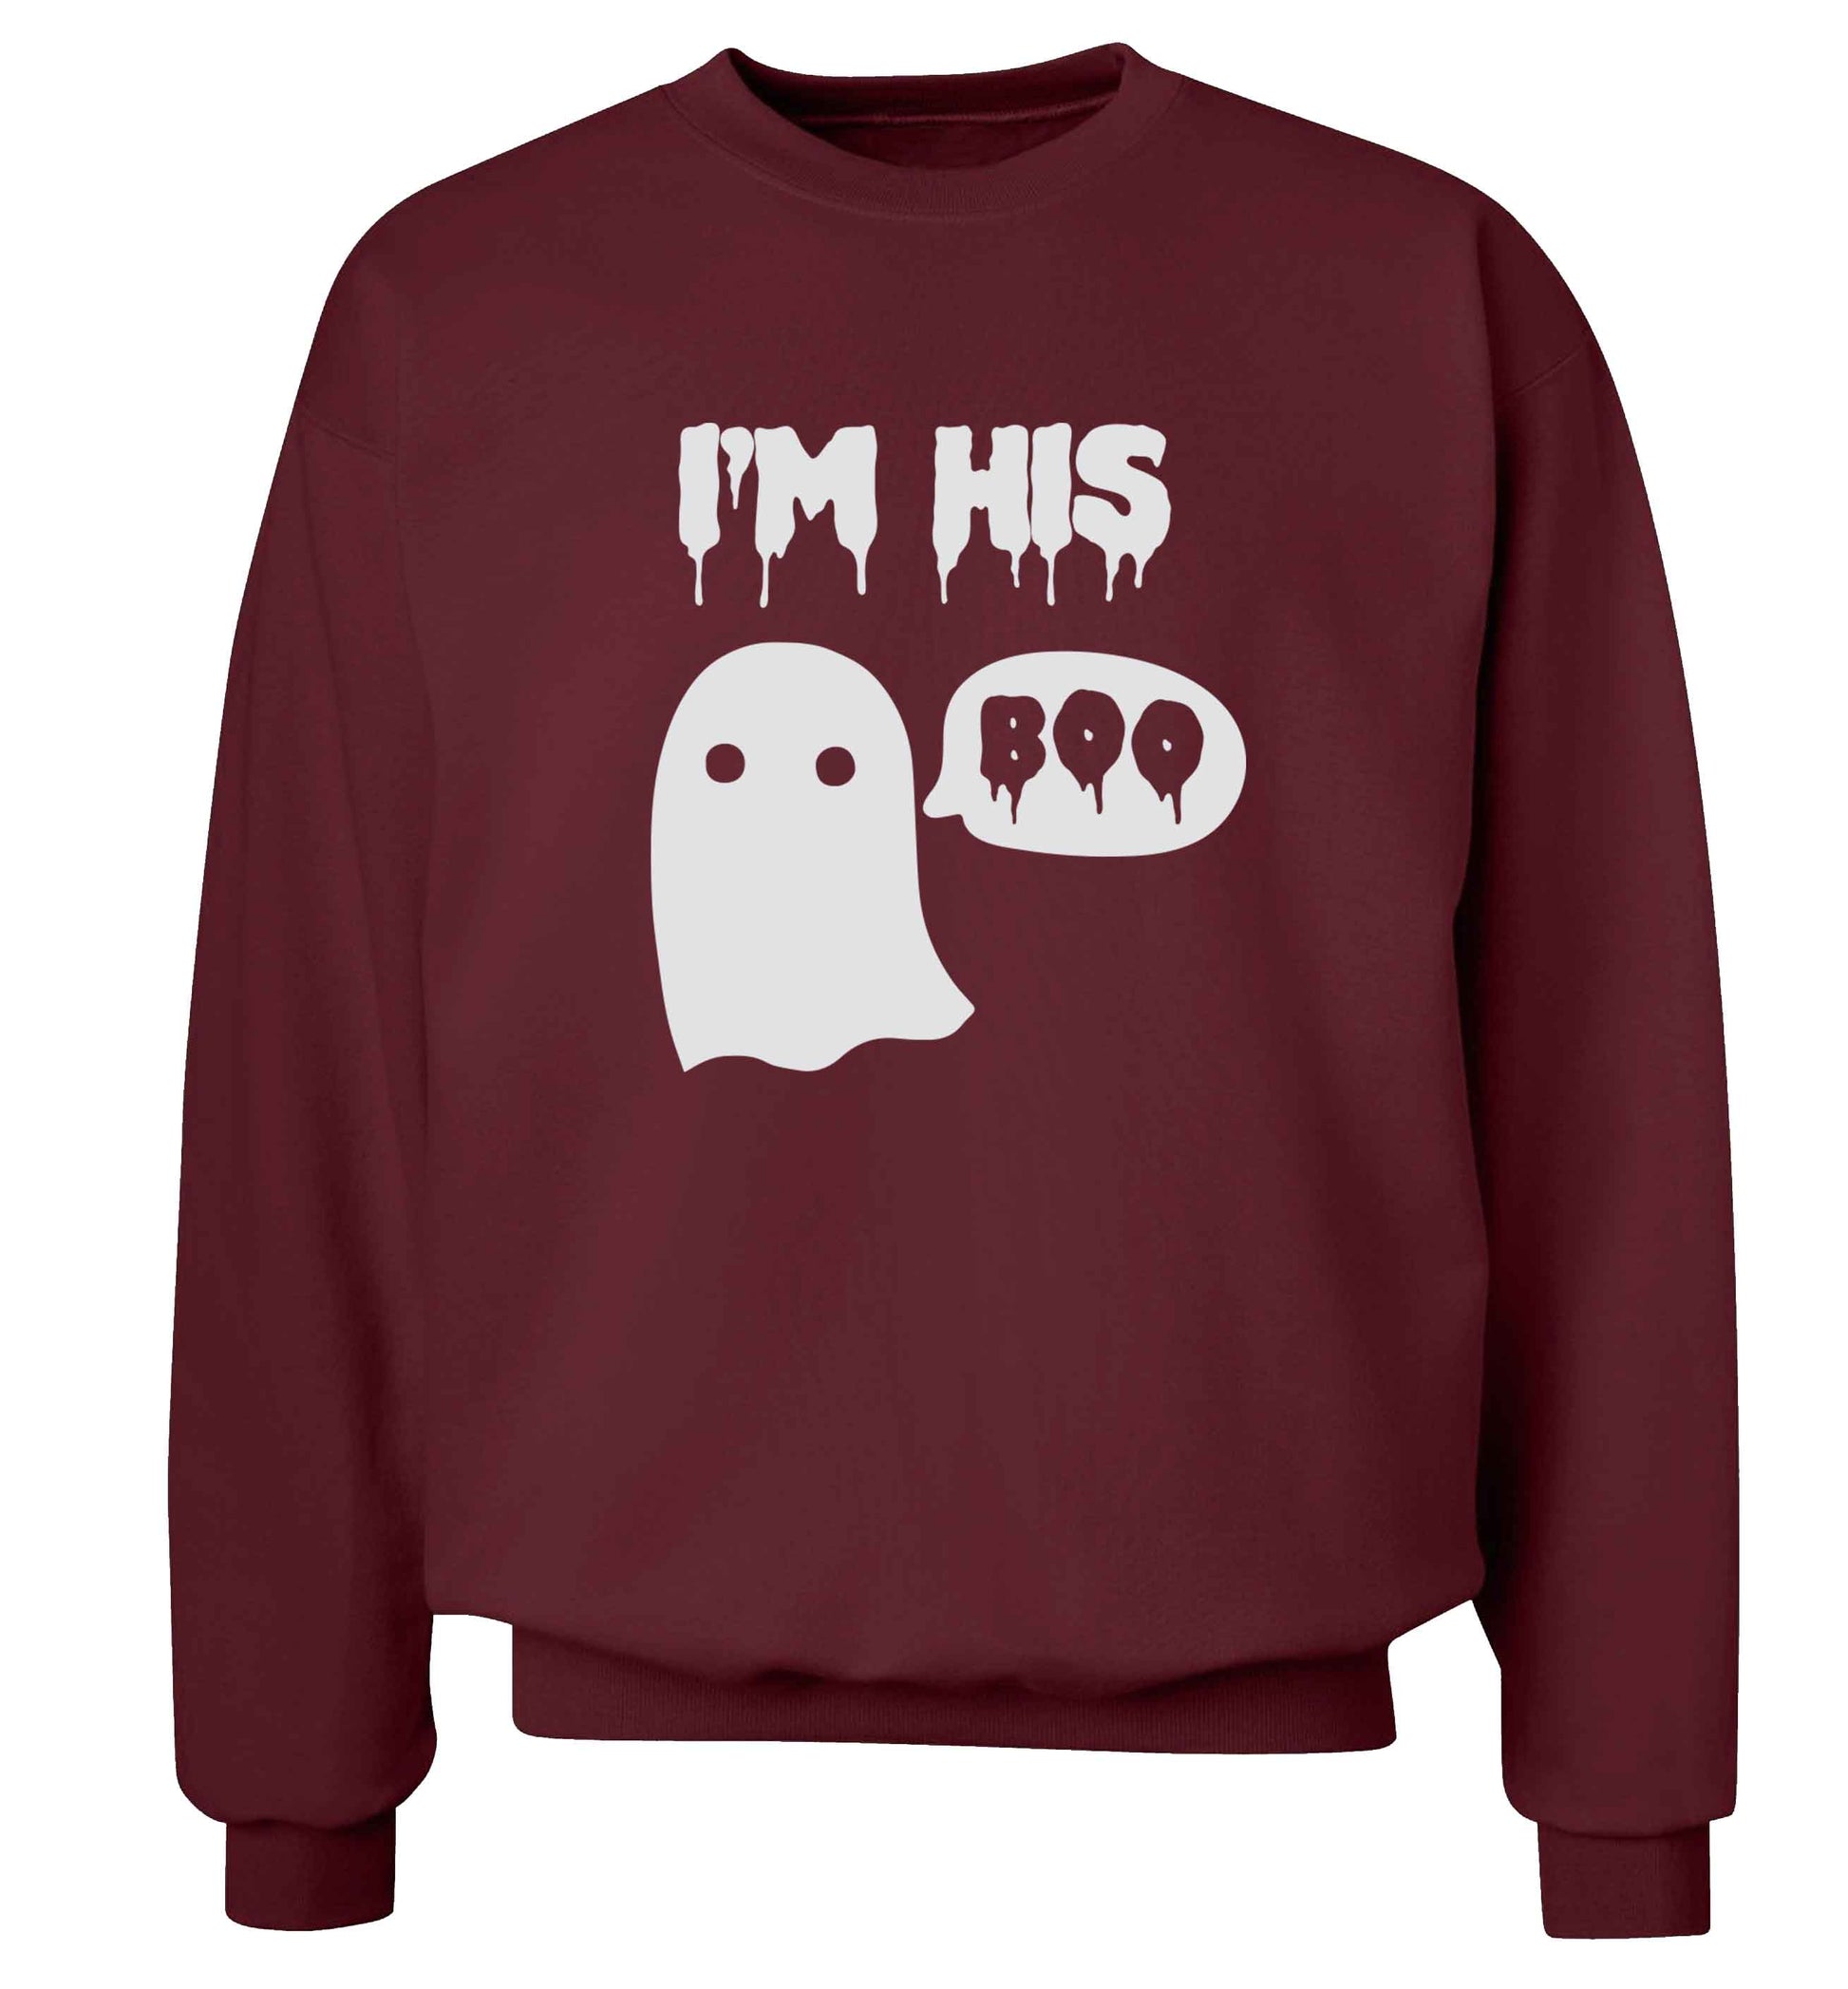 I'm his boo adult's unisex maroon sweater 2XL